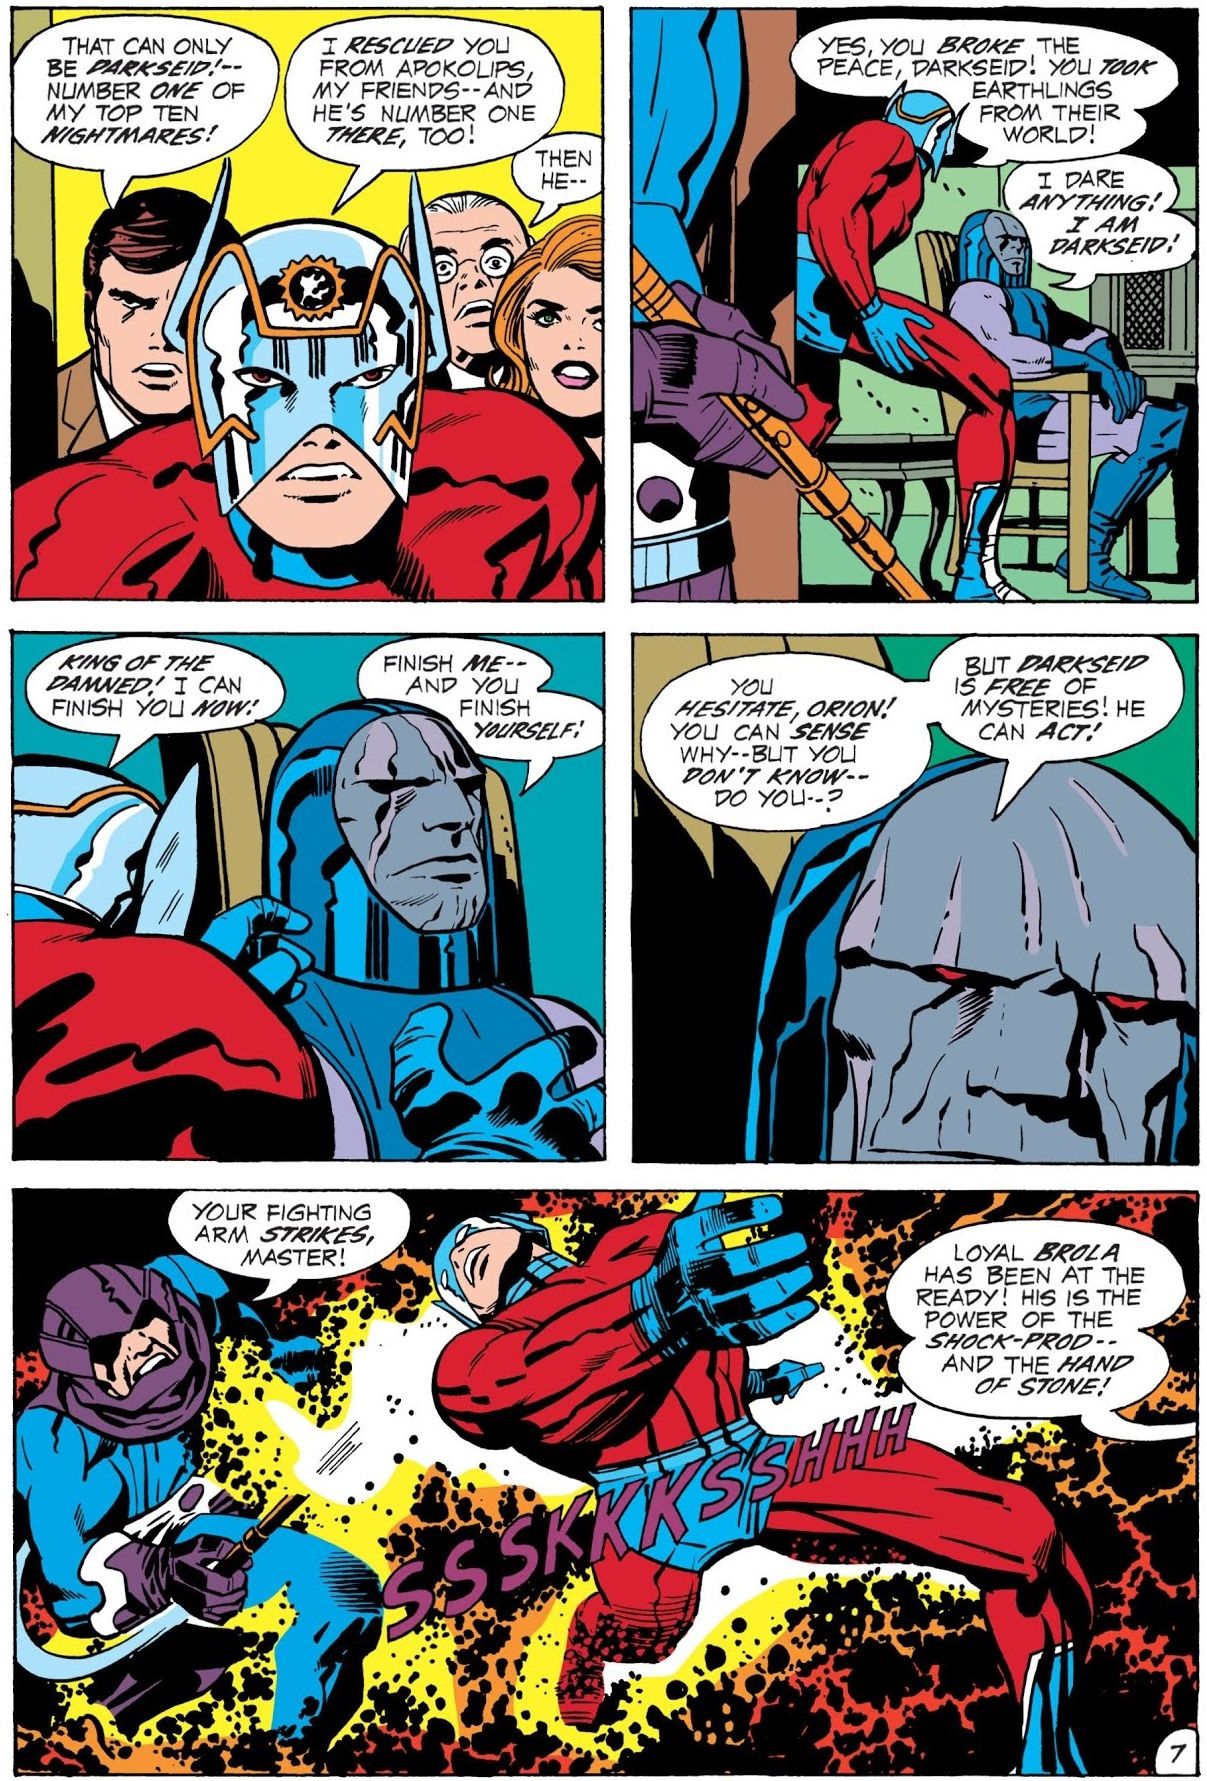 Darkseid can't even bother to attack Orion